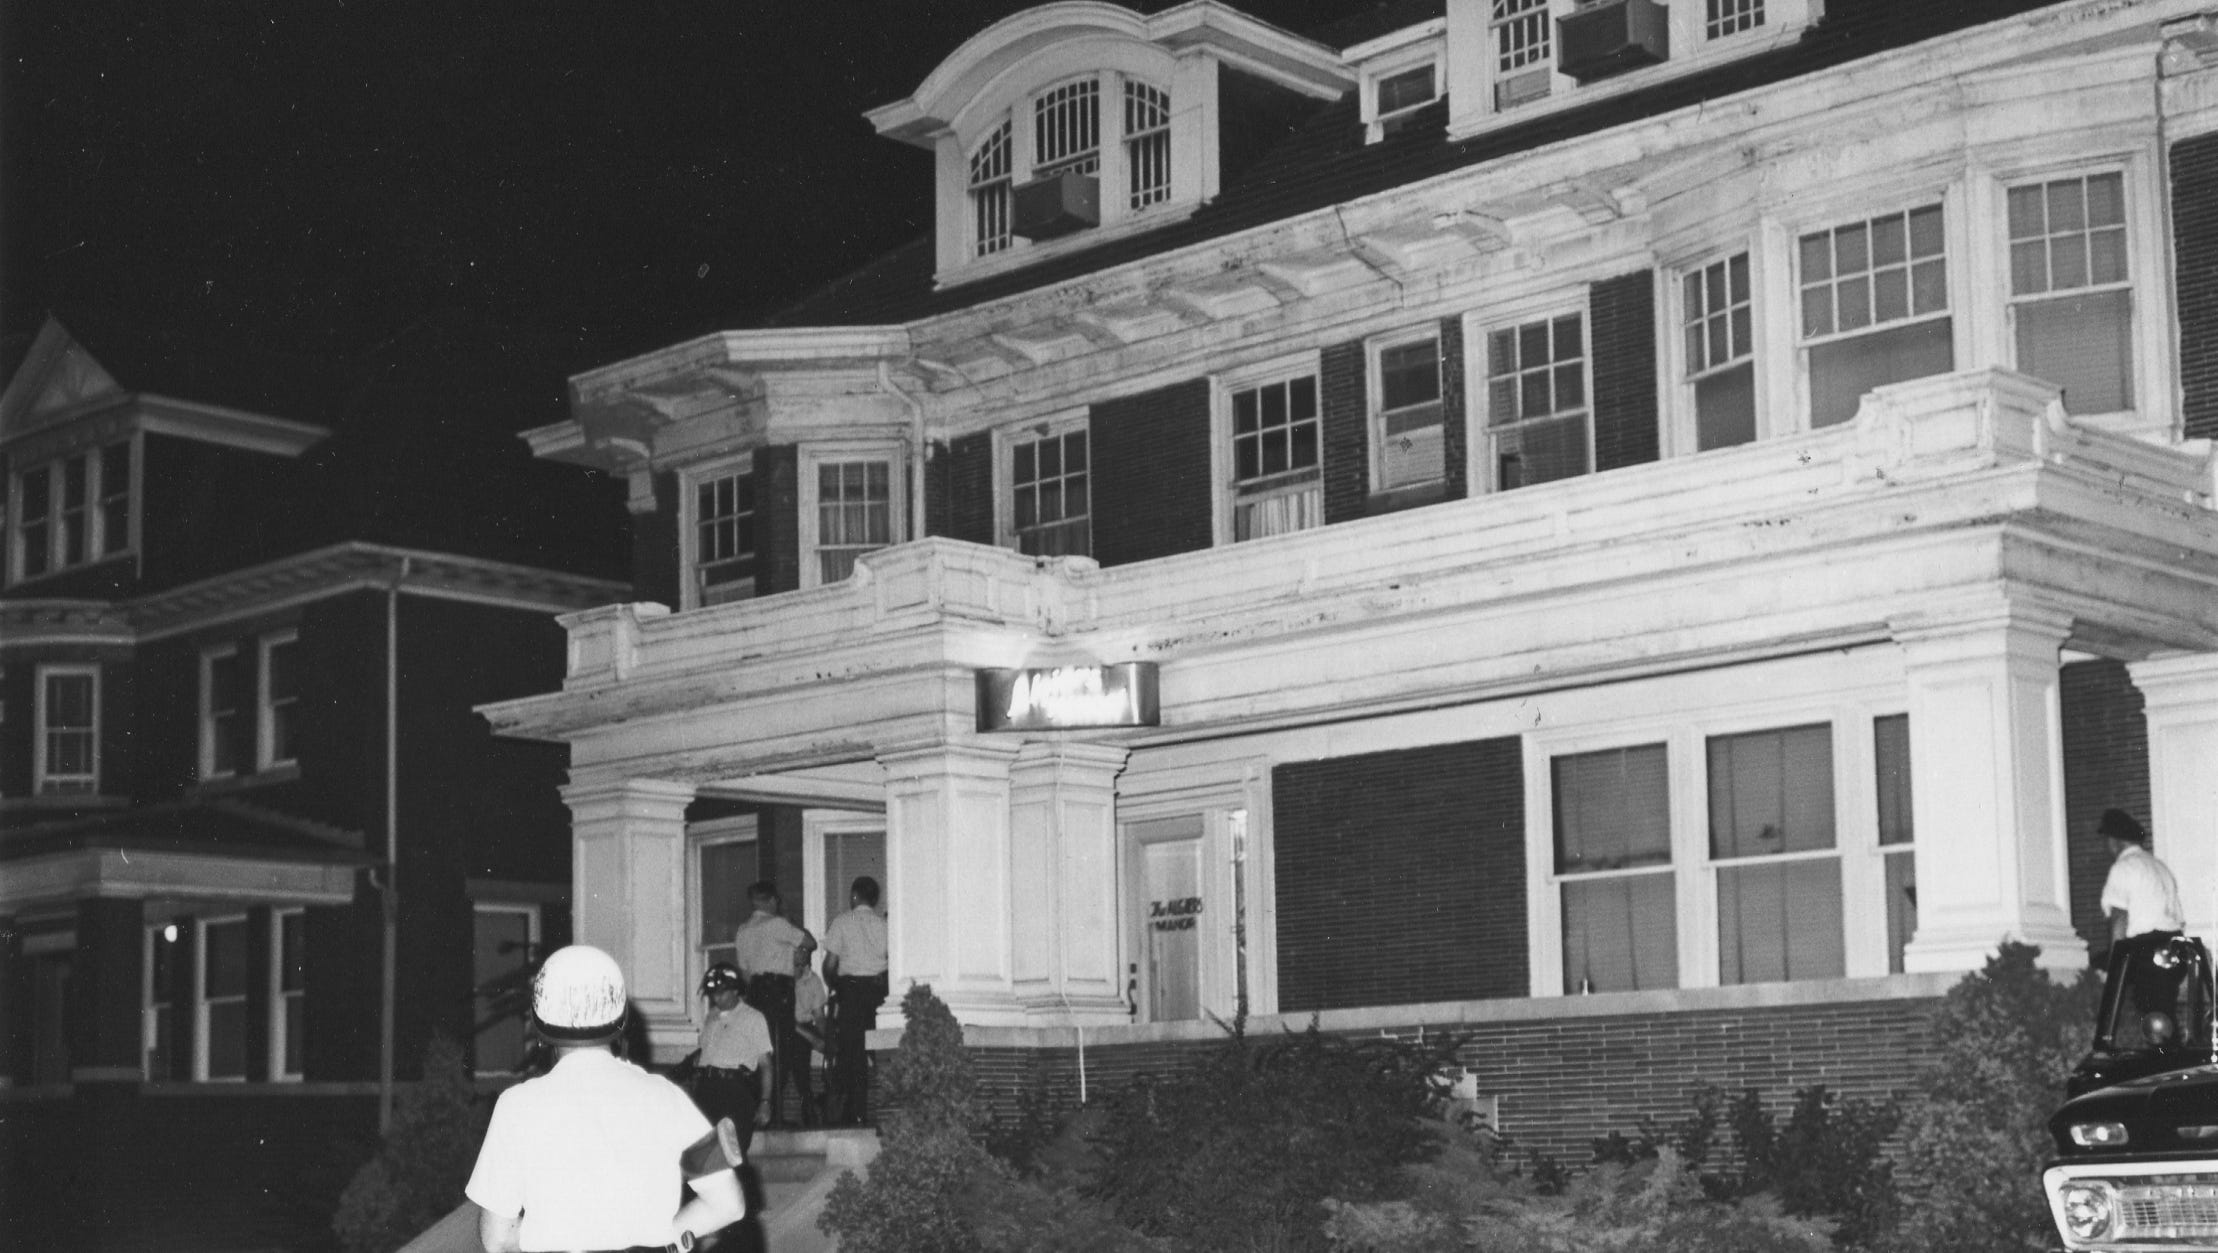 Police are seen during the night of July 25-26, 1967, at the three-story annex of the Algiers Motel in Detroit, where three young black men were found slain during the 1967 uprising.